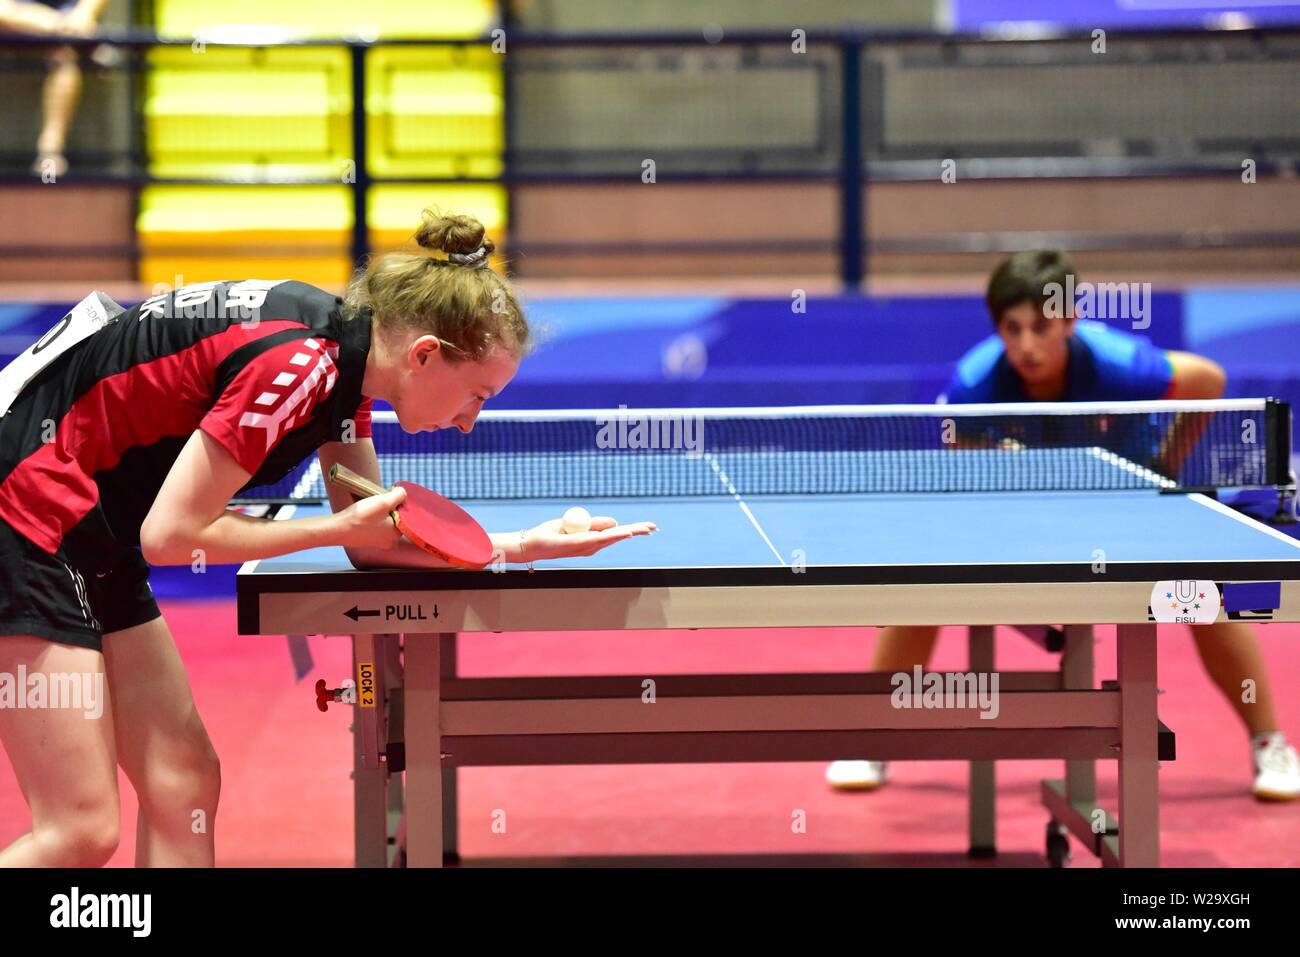 Pozzuoli, Italy. 07th July, 2019. Thepoland player Karolina Lalak during  the match of table tennis of Summer Universiade match between Italy and  Poland at the PalaTrincone in Pozzuoli (Napoli) . Credit: Paola